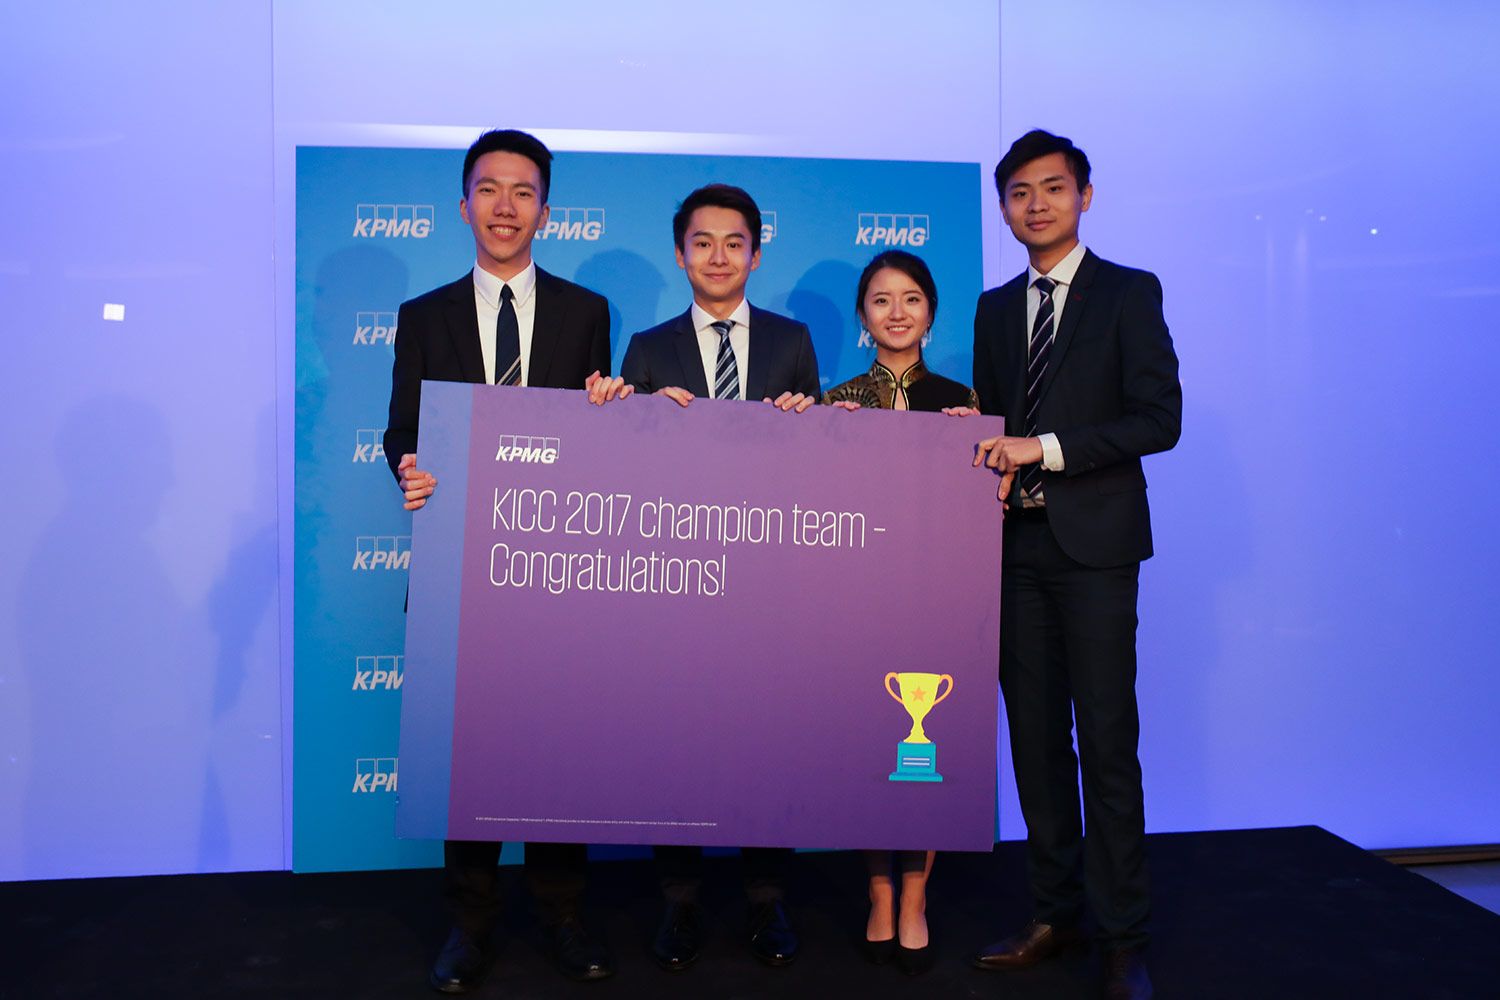 Team China wins KPMG’s global student competition